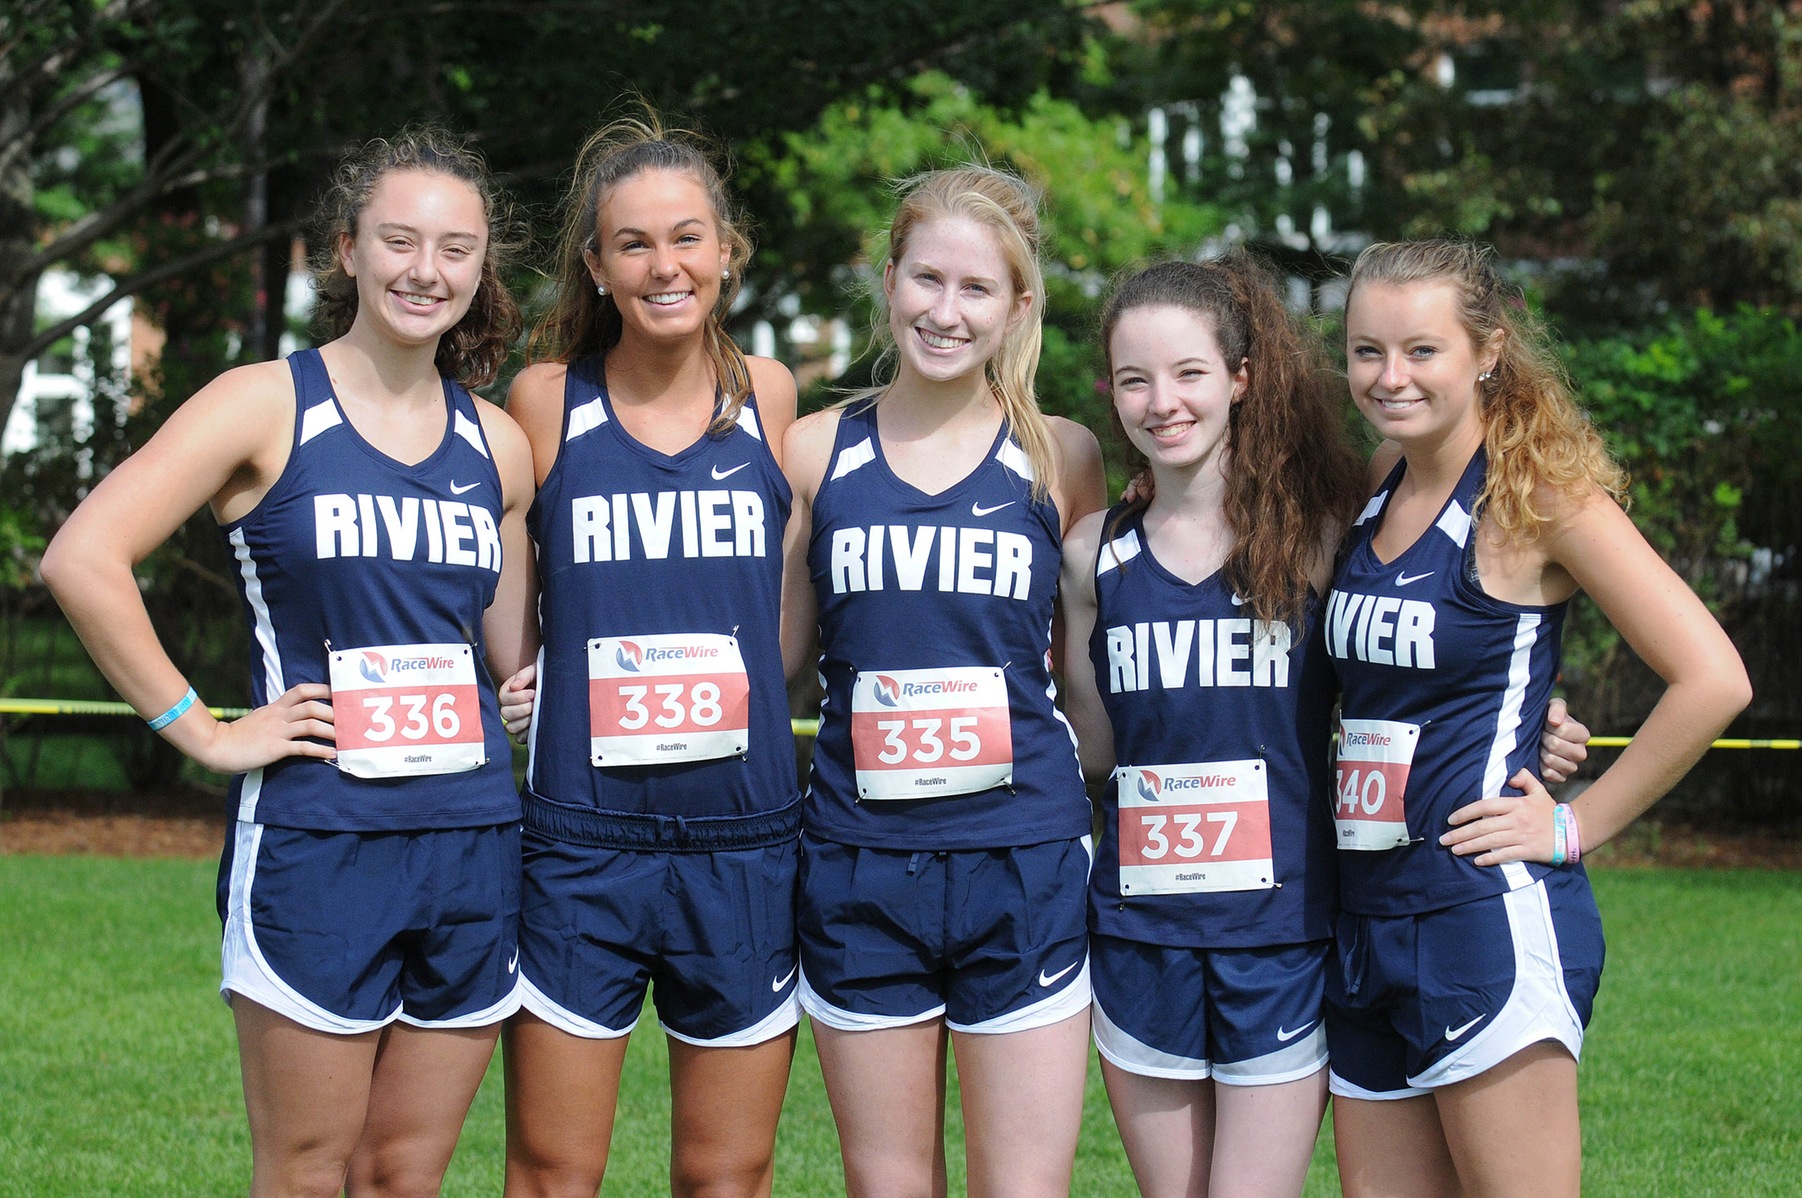 Women's Cross Country: Raiders finish 2nd overall as a team at Travis J. Fuller Invitational